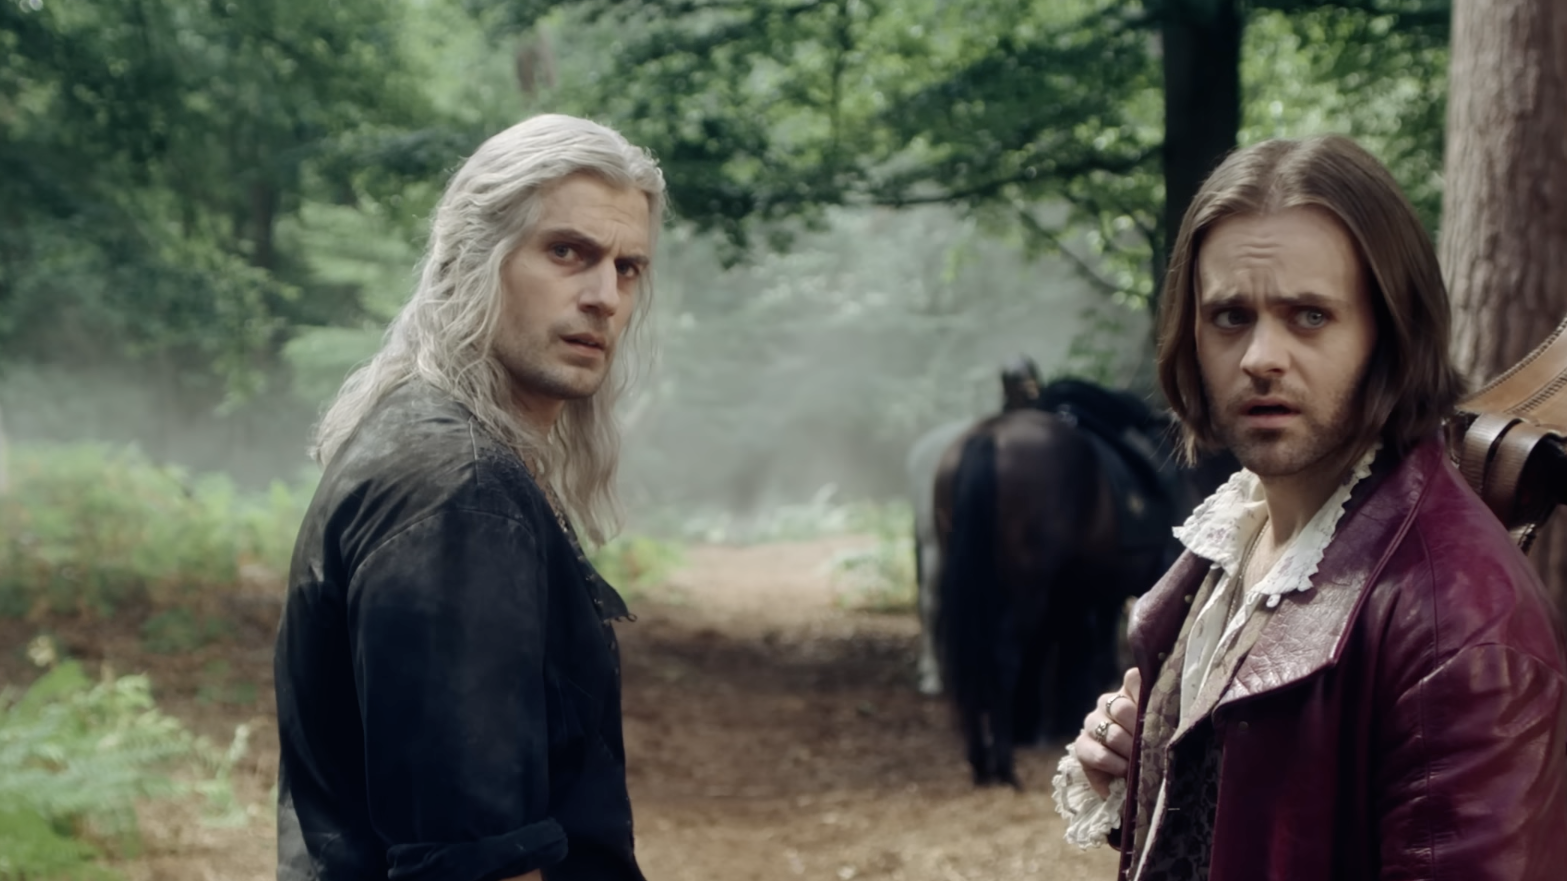 The Witcher' Season 3, Volume 1 Review: Henry Cavill, Please Don't Go